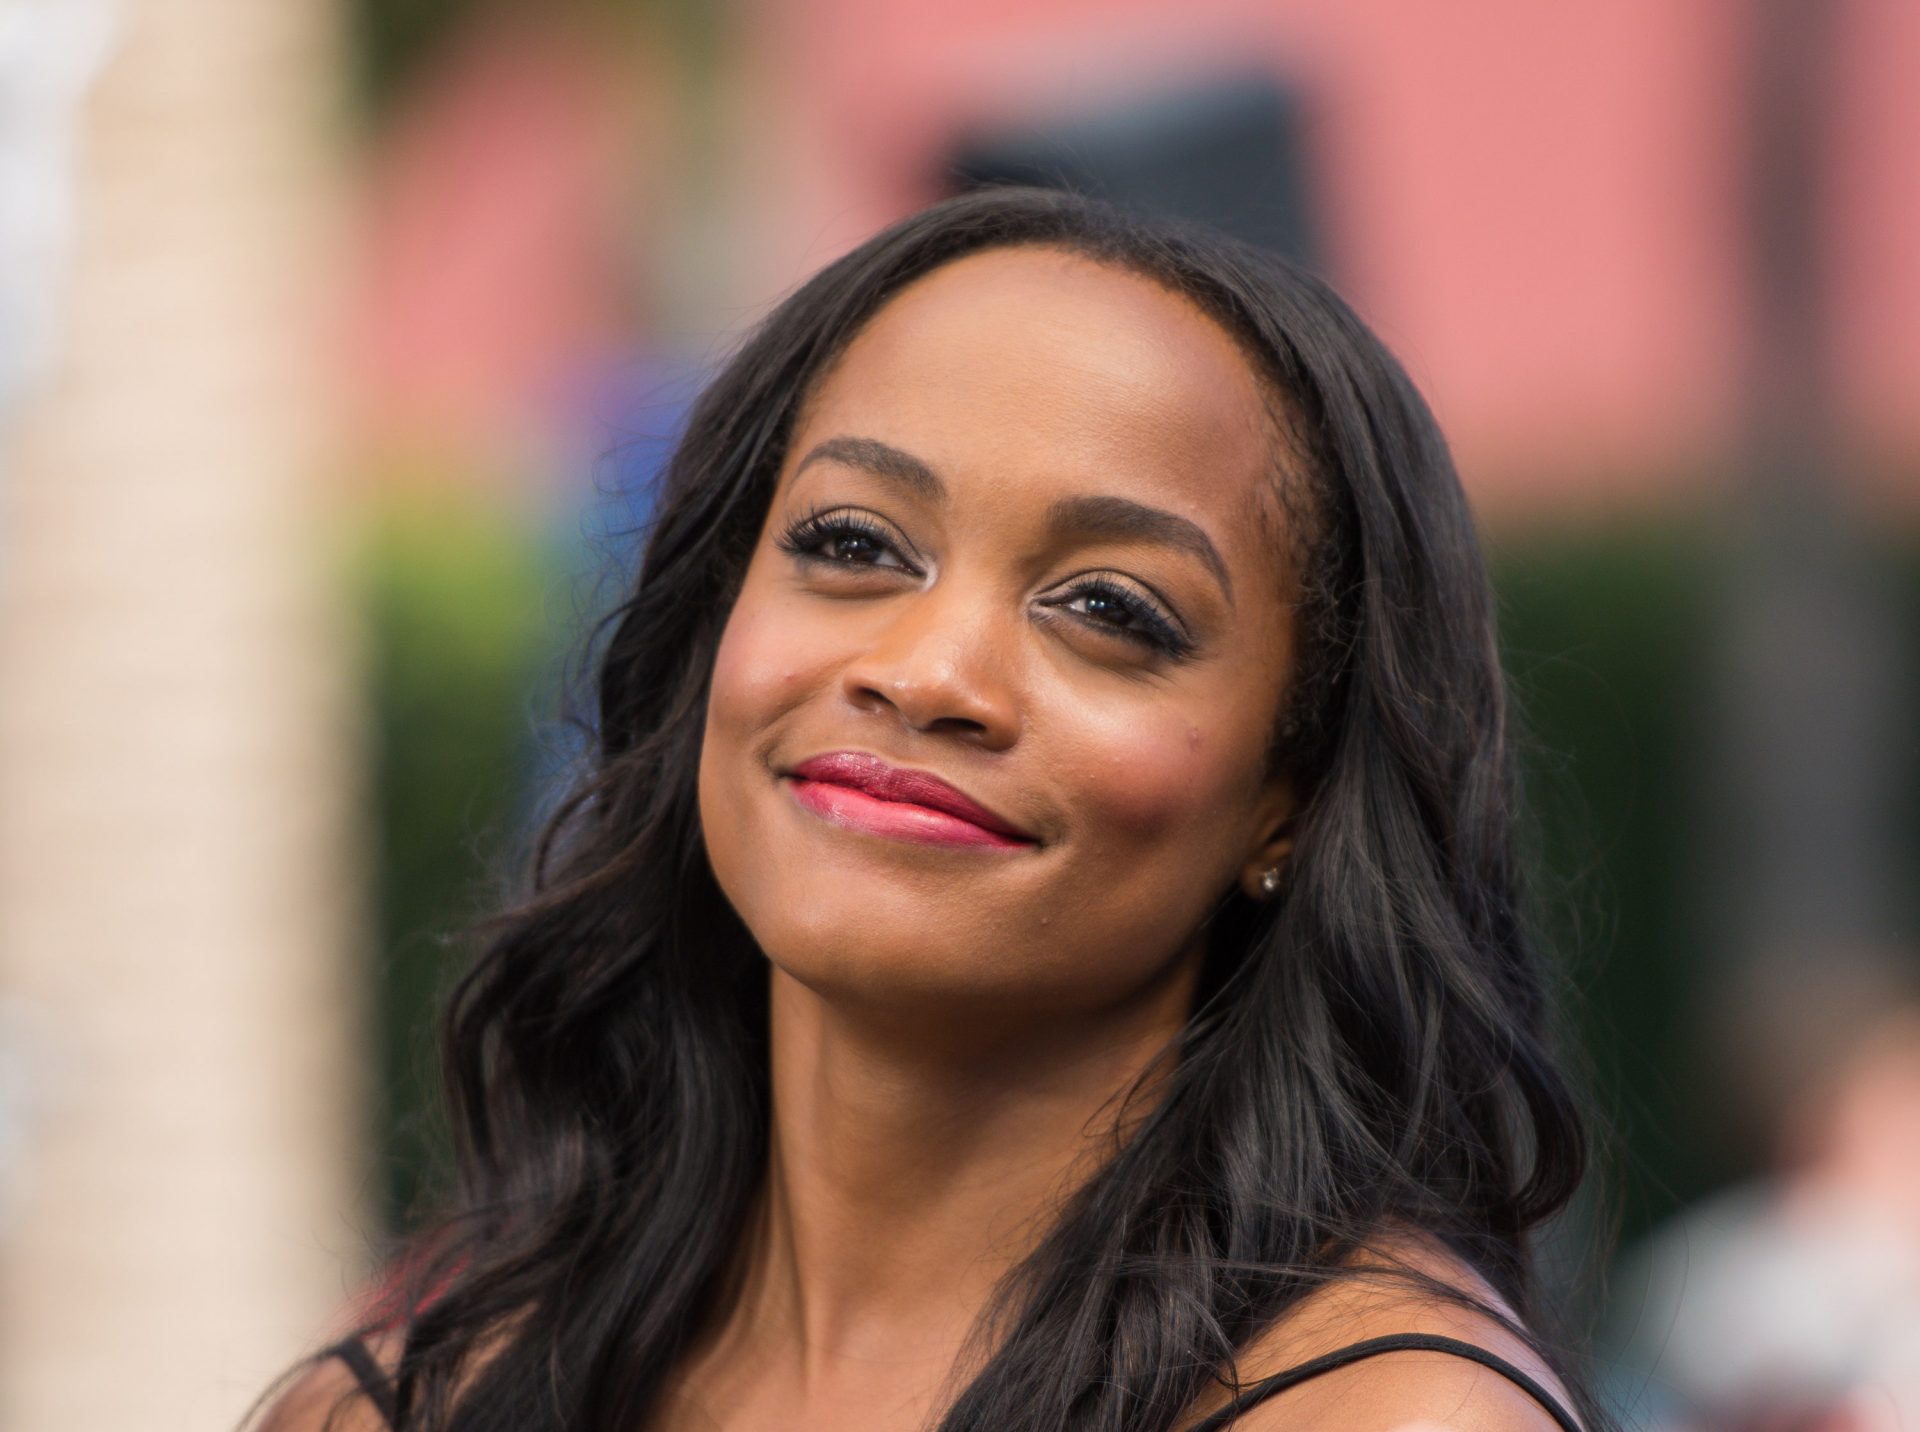 Rachel Lindsay No Longer Needs to be Affiliated With the Bachelor Franchise